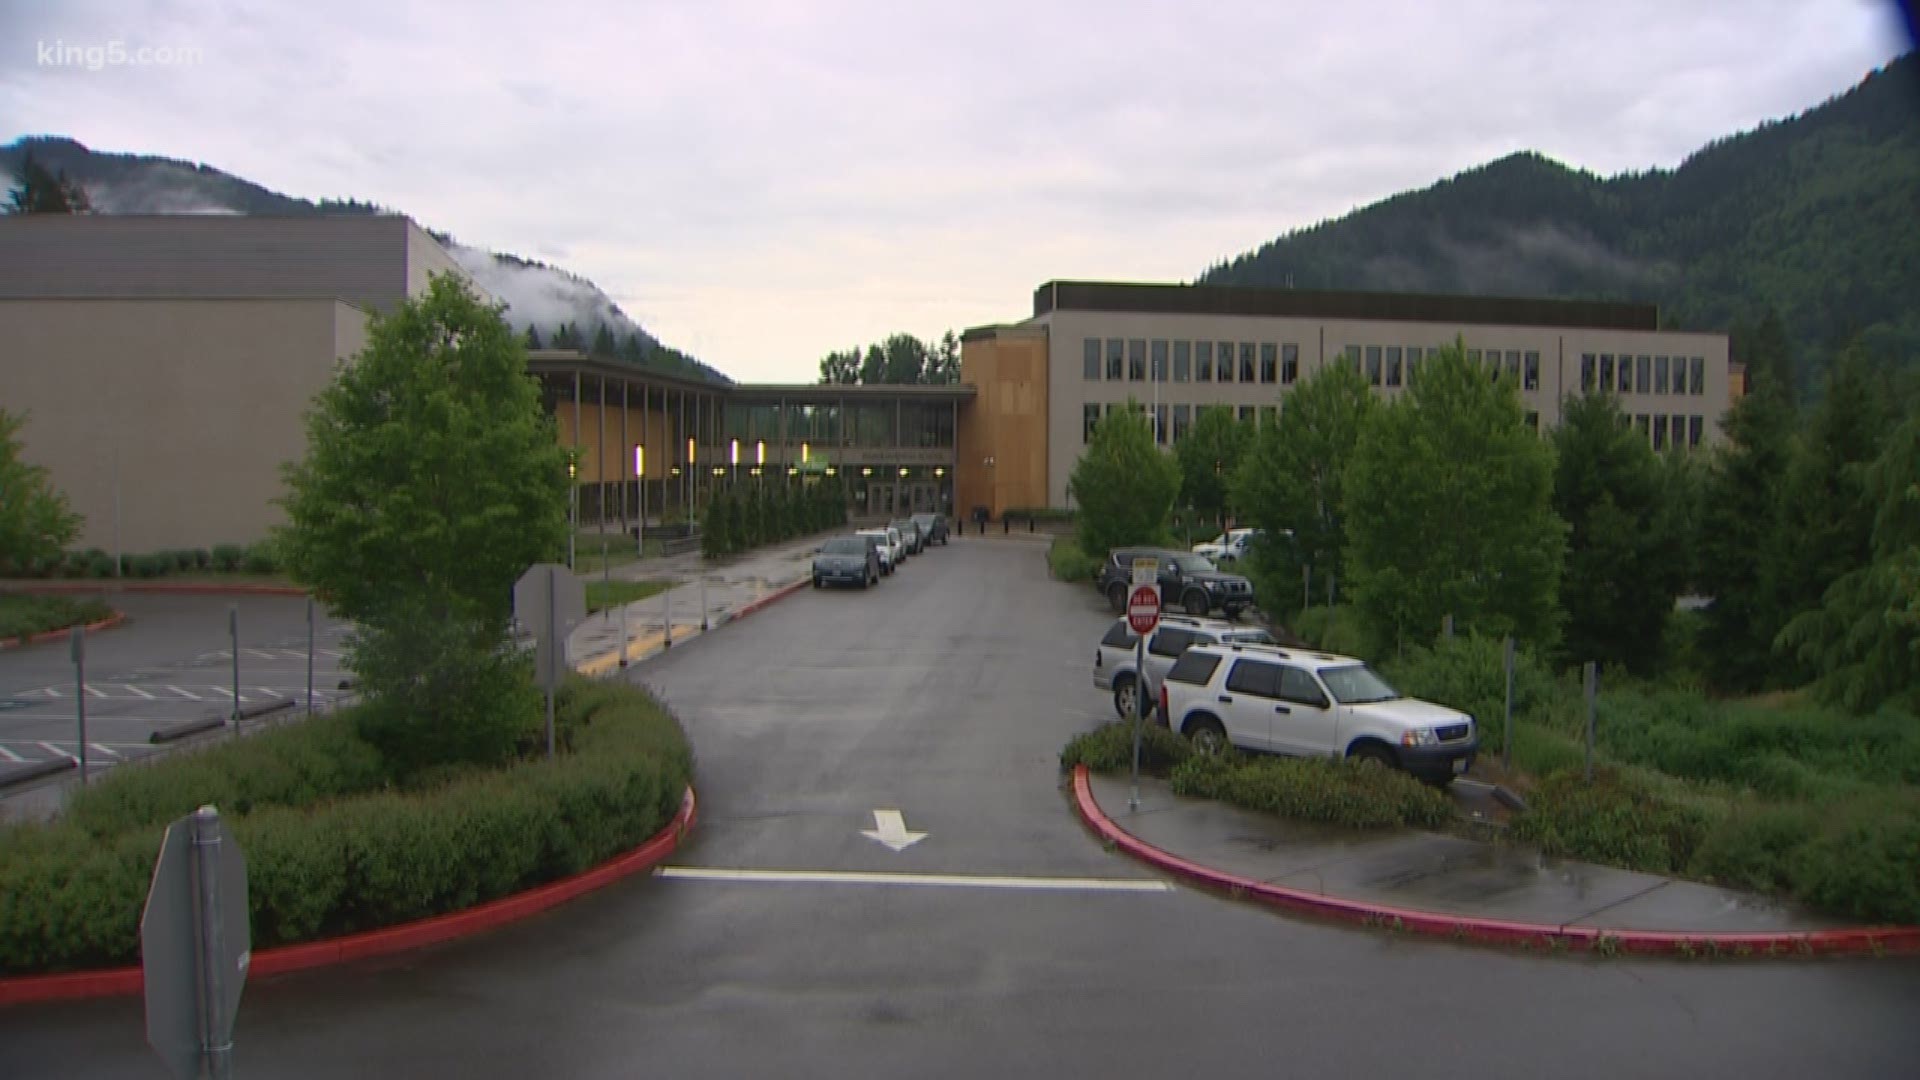 Five new cases of measles were announced in western Washington this week, involving two schools. KING 5's Natalie Swaby reports.